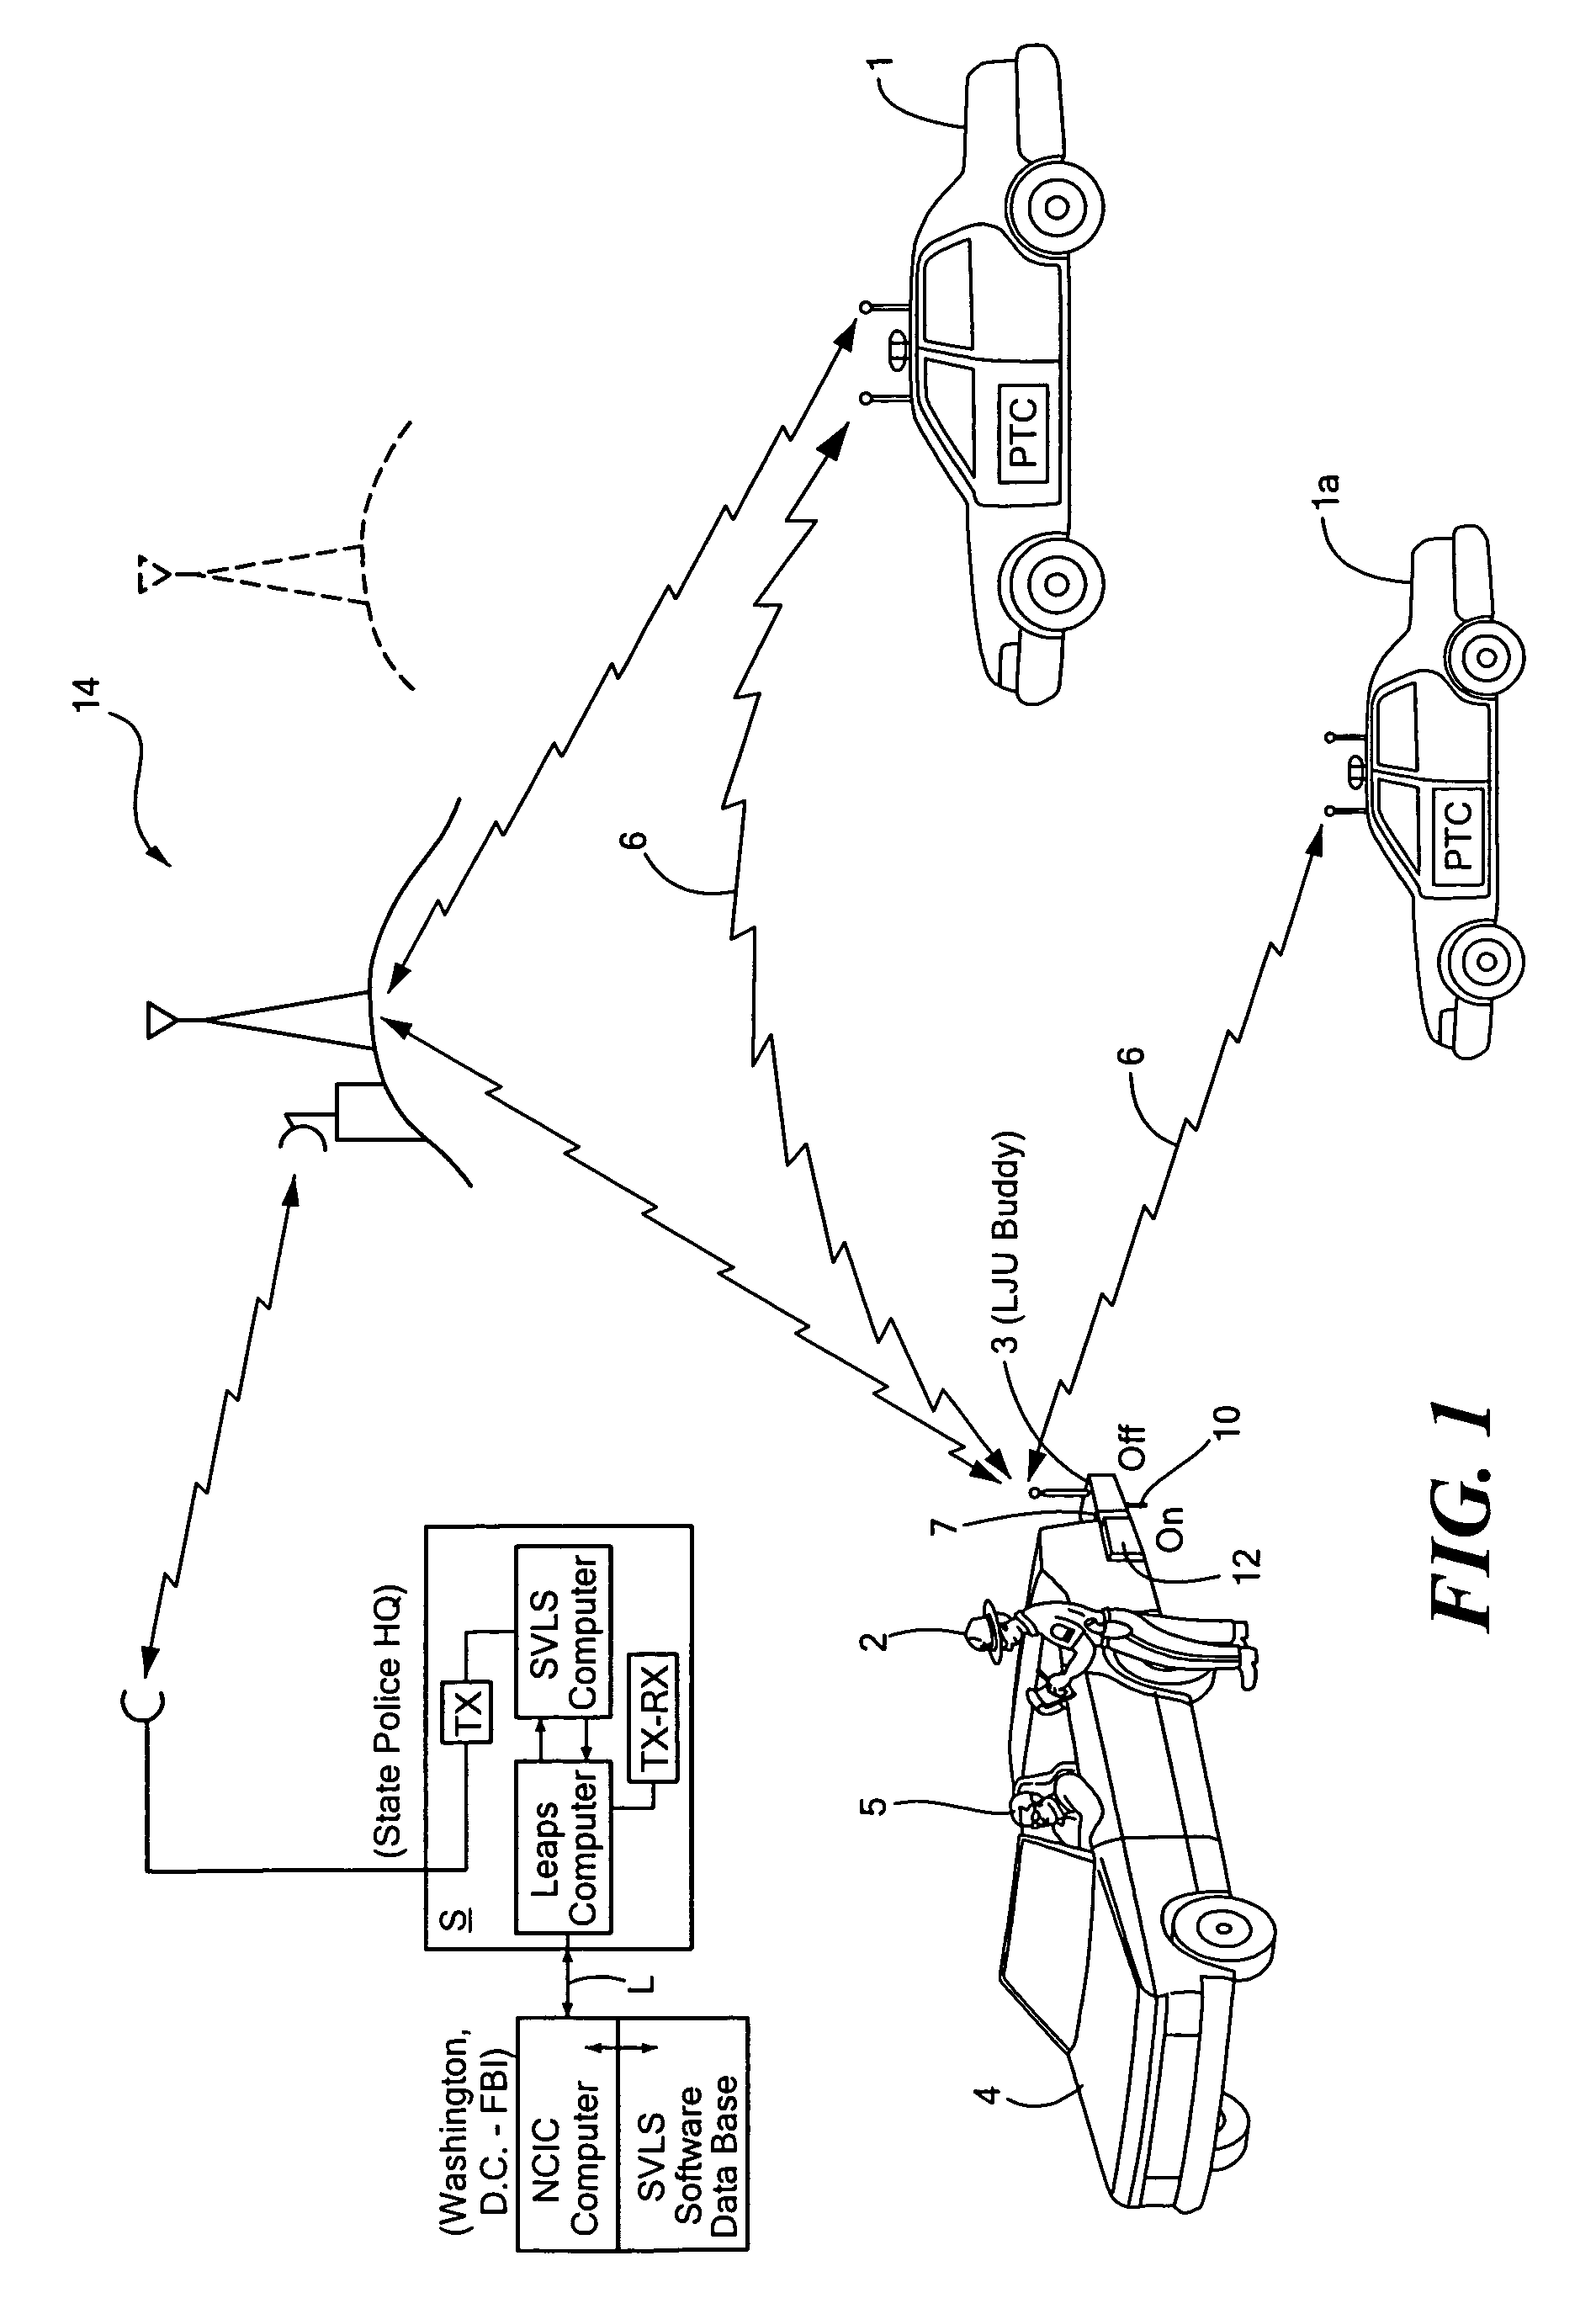 Method of and apparatus for vehicle inspection and the like with security for the inspector and facility for radio tracking of a vehicle attempting escape from the inspector